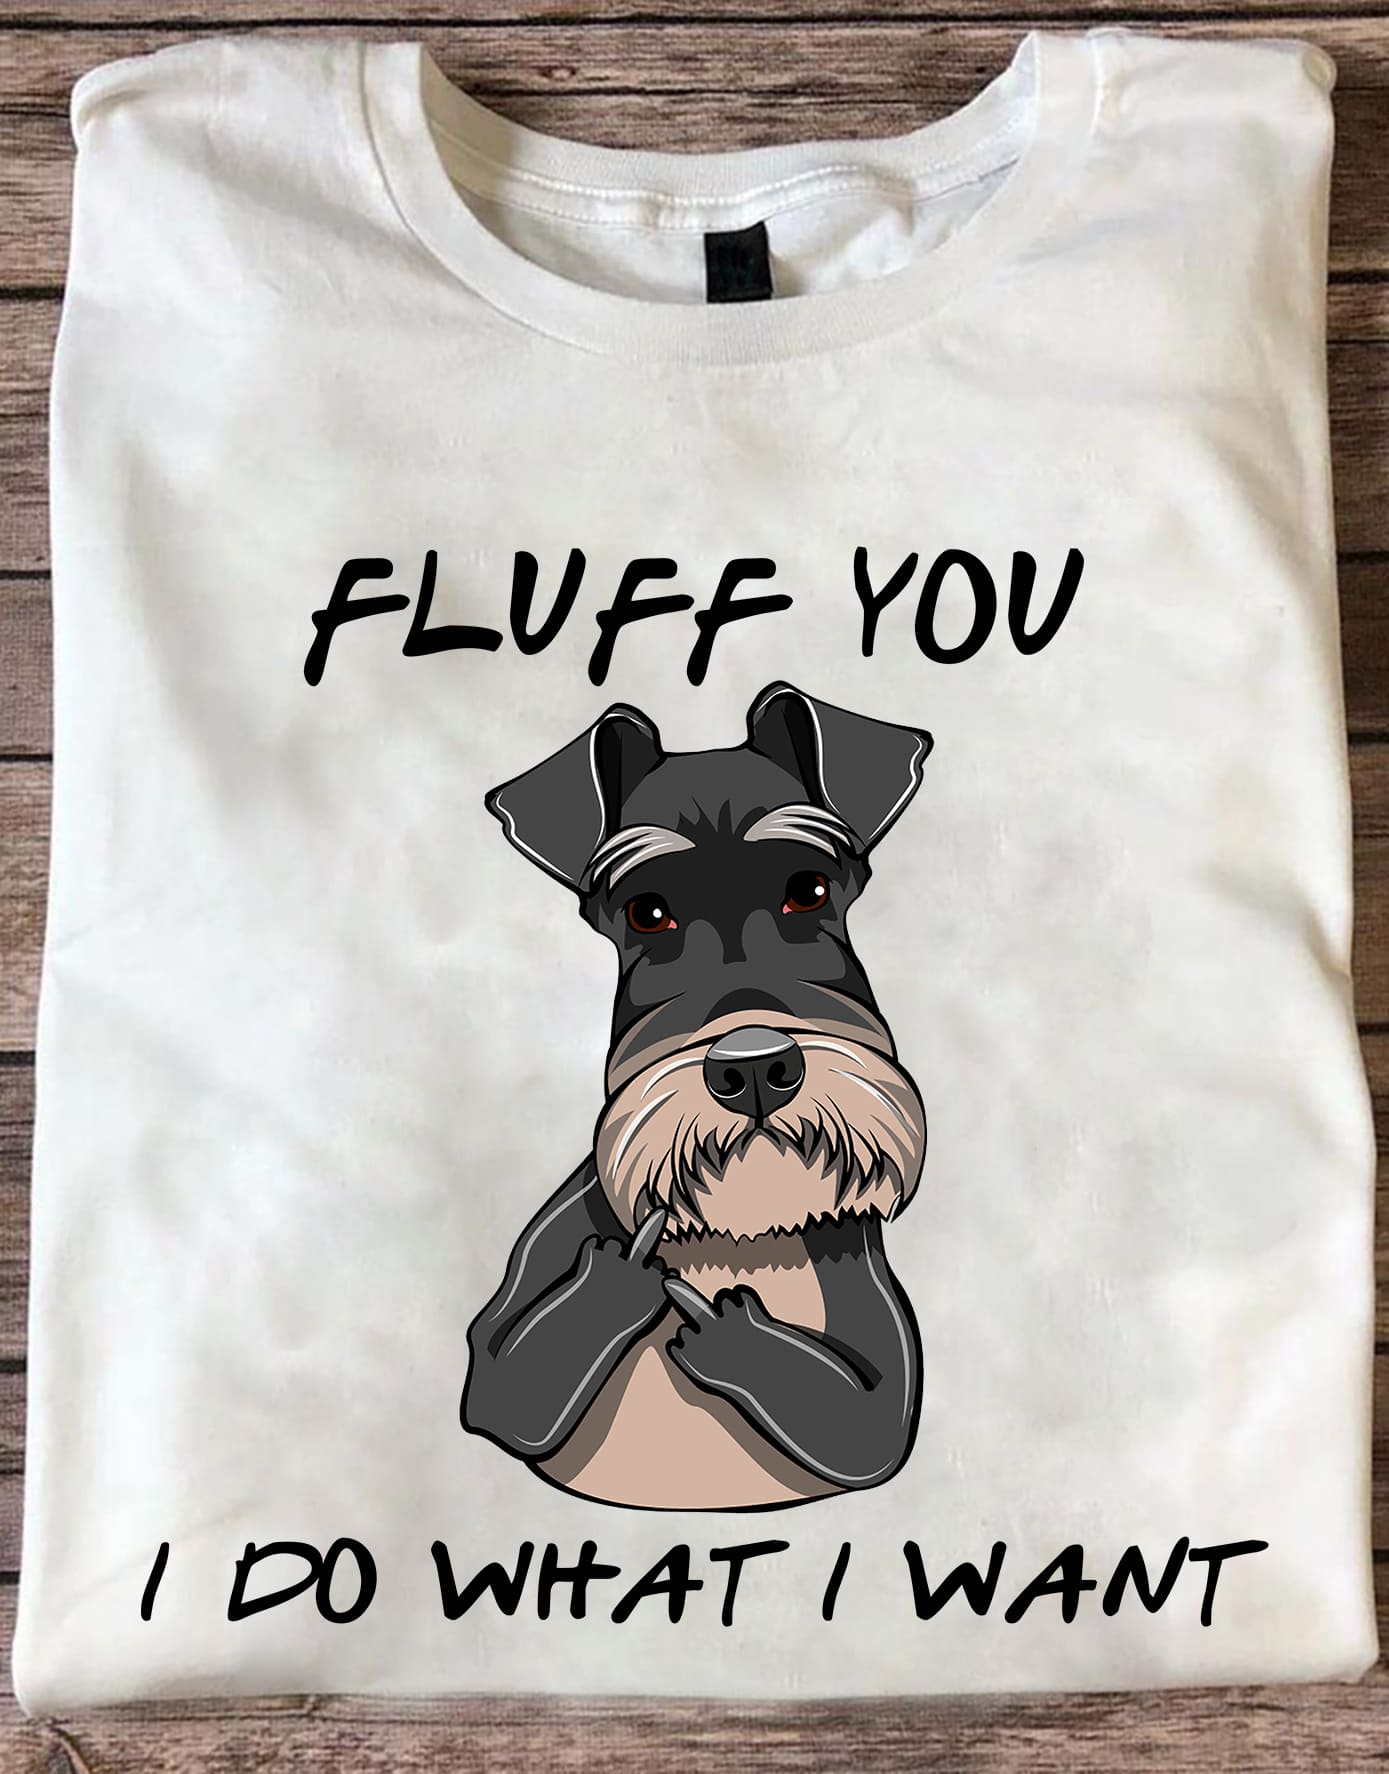 Fluff you I do what I want - Schnauzer dog T-shirt, gift for dog lover